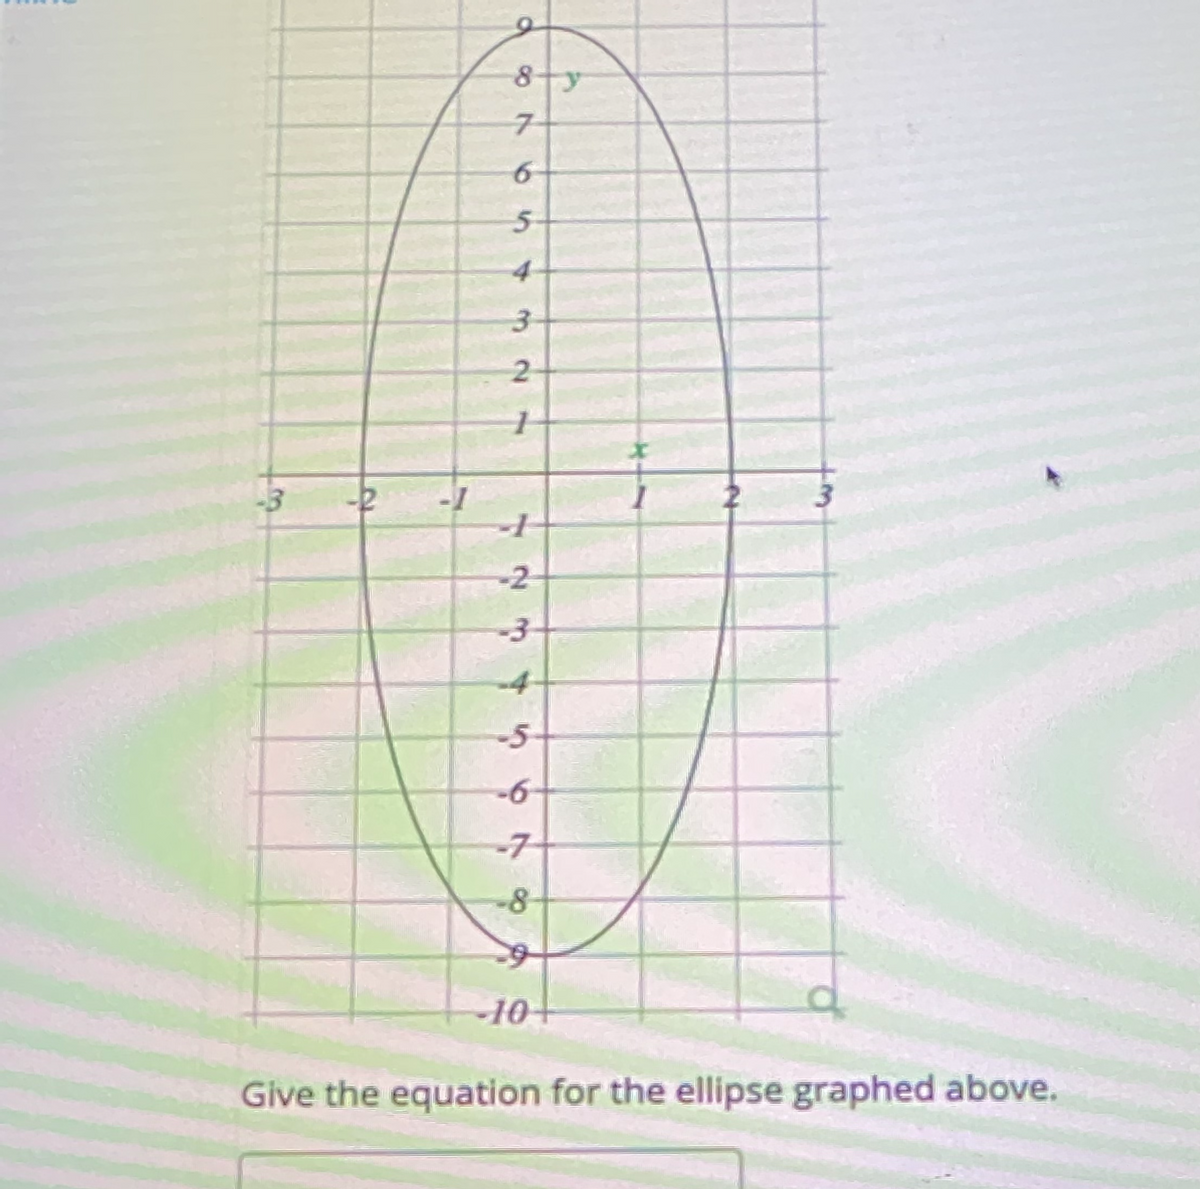 8+y
7-
3-
2-
-3
-1
-2
-3-
-4-
-5
-7-
-8-
-10+
Give the equation for the ellipse graphed above.
6
